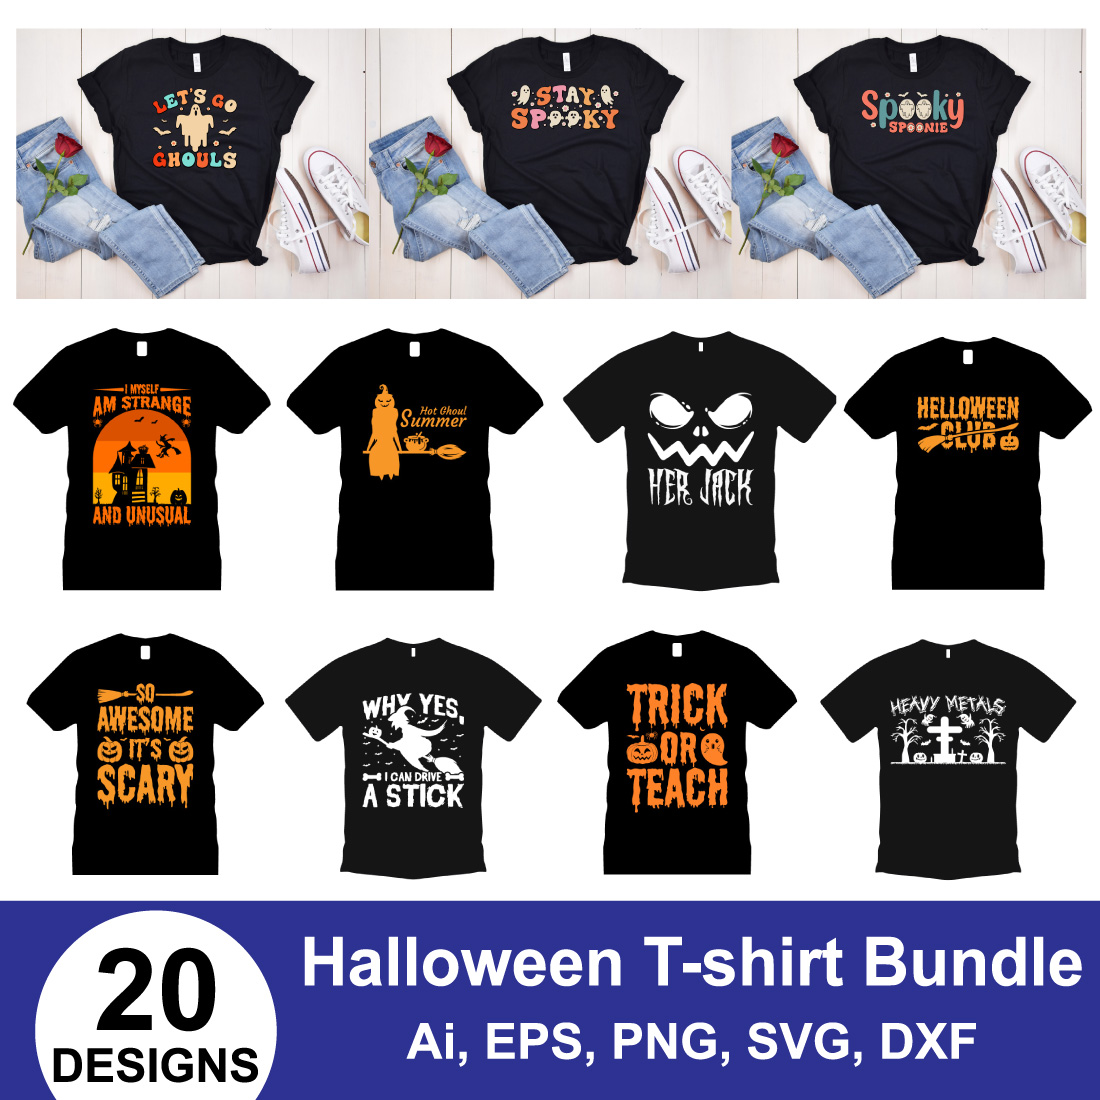 A selection of images of T-shirts with beautiful prints on the theme of Halloween